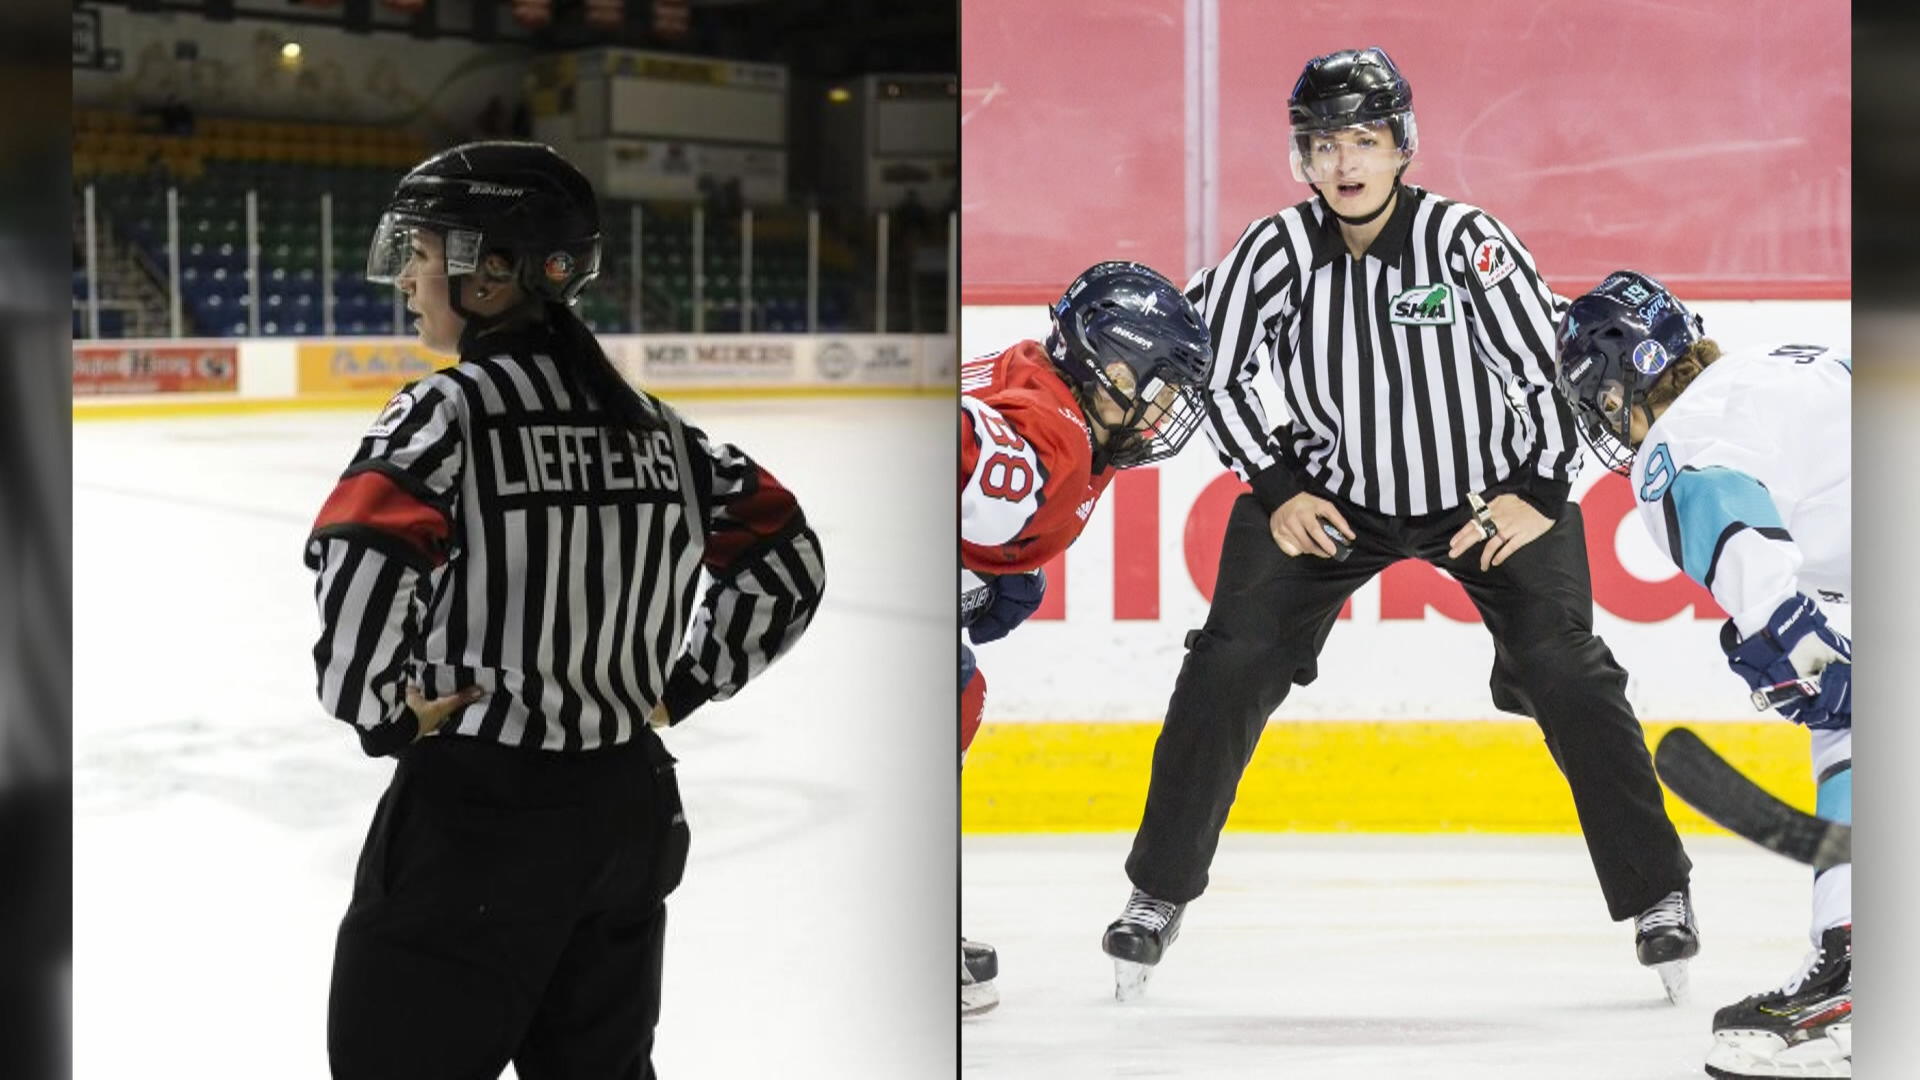 Women Referees in the NHL